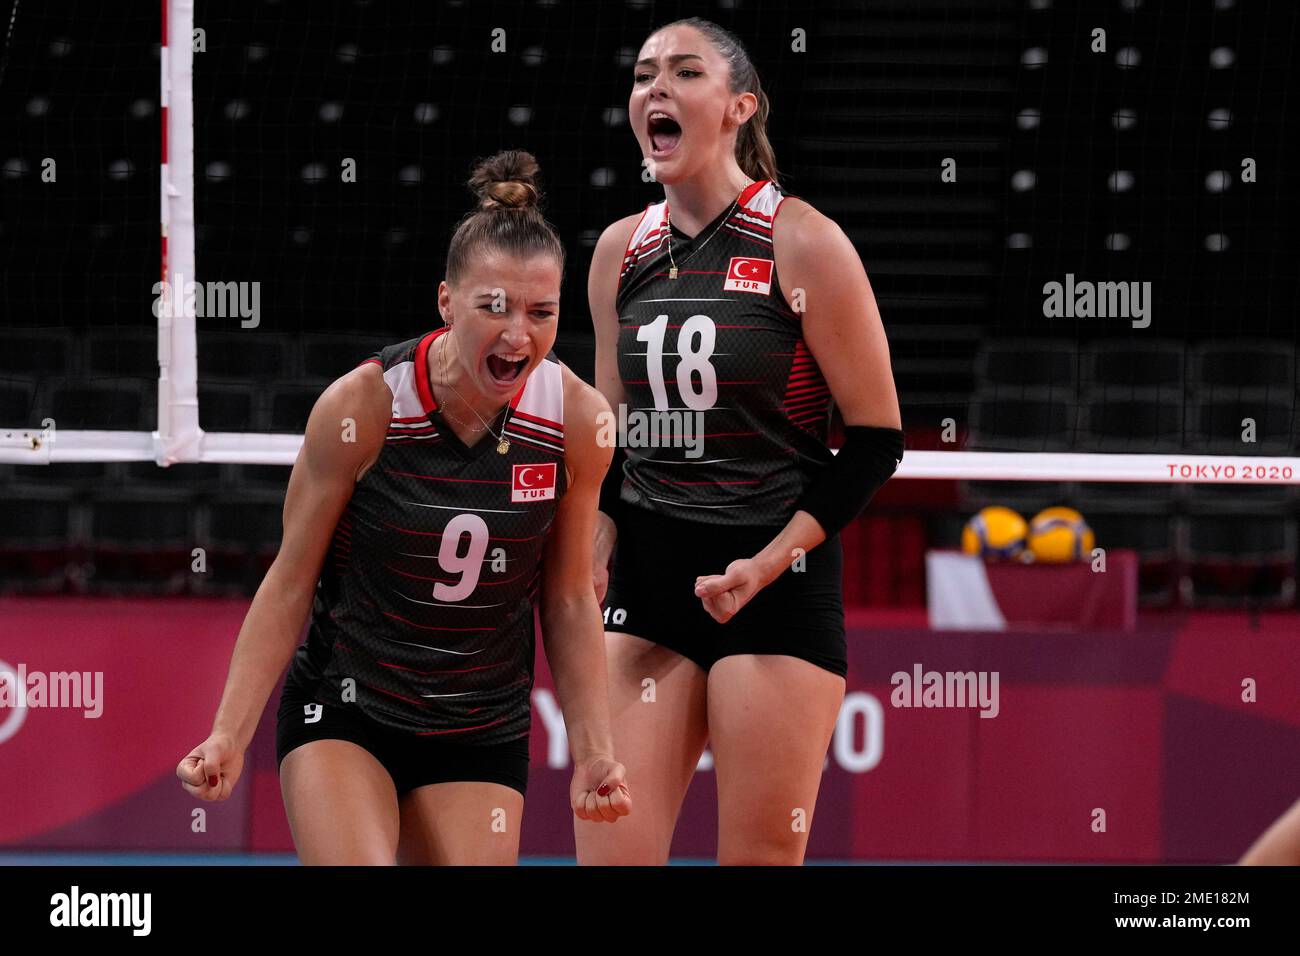 Turkeys Meliha Ismailoglu, left, and Turkeys Zehra Gunes celebrate winning a point during the womens volleyball preliminary round pool B match between Russian Olympic Committee and Turkey at the 2020 Summer Olympics,